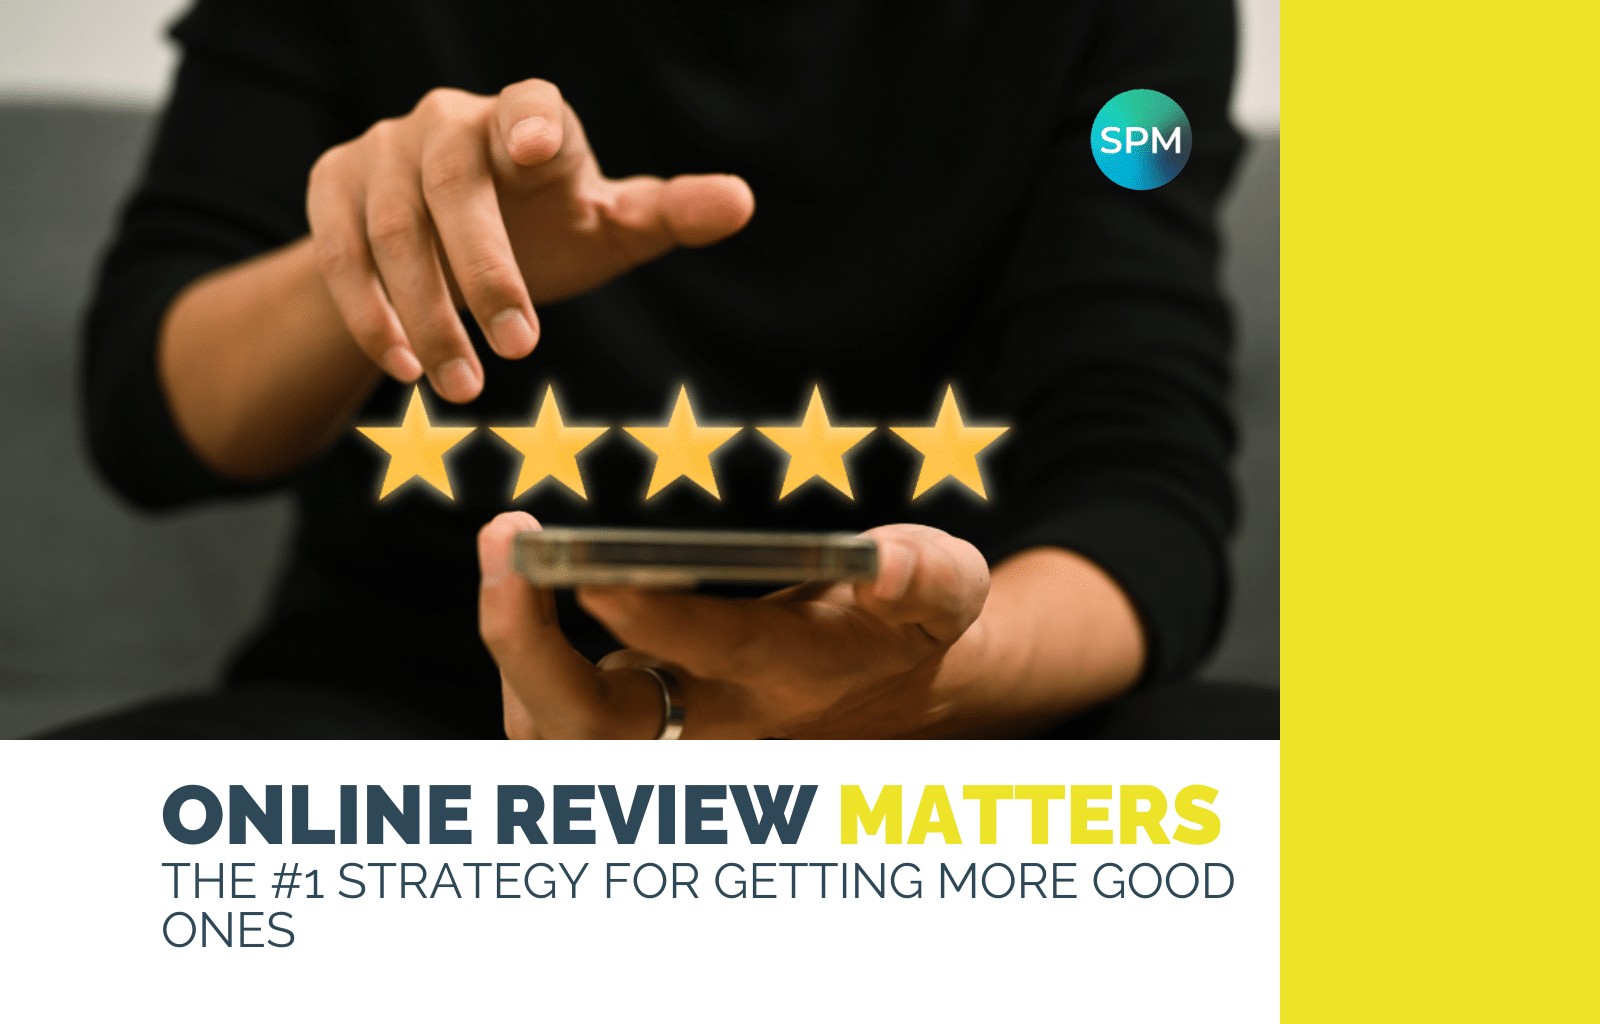 Online Reviews Matter The #1 Strategy for Getting More Good Ones (1)